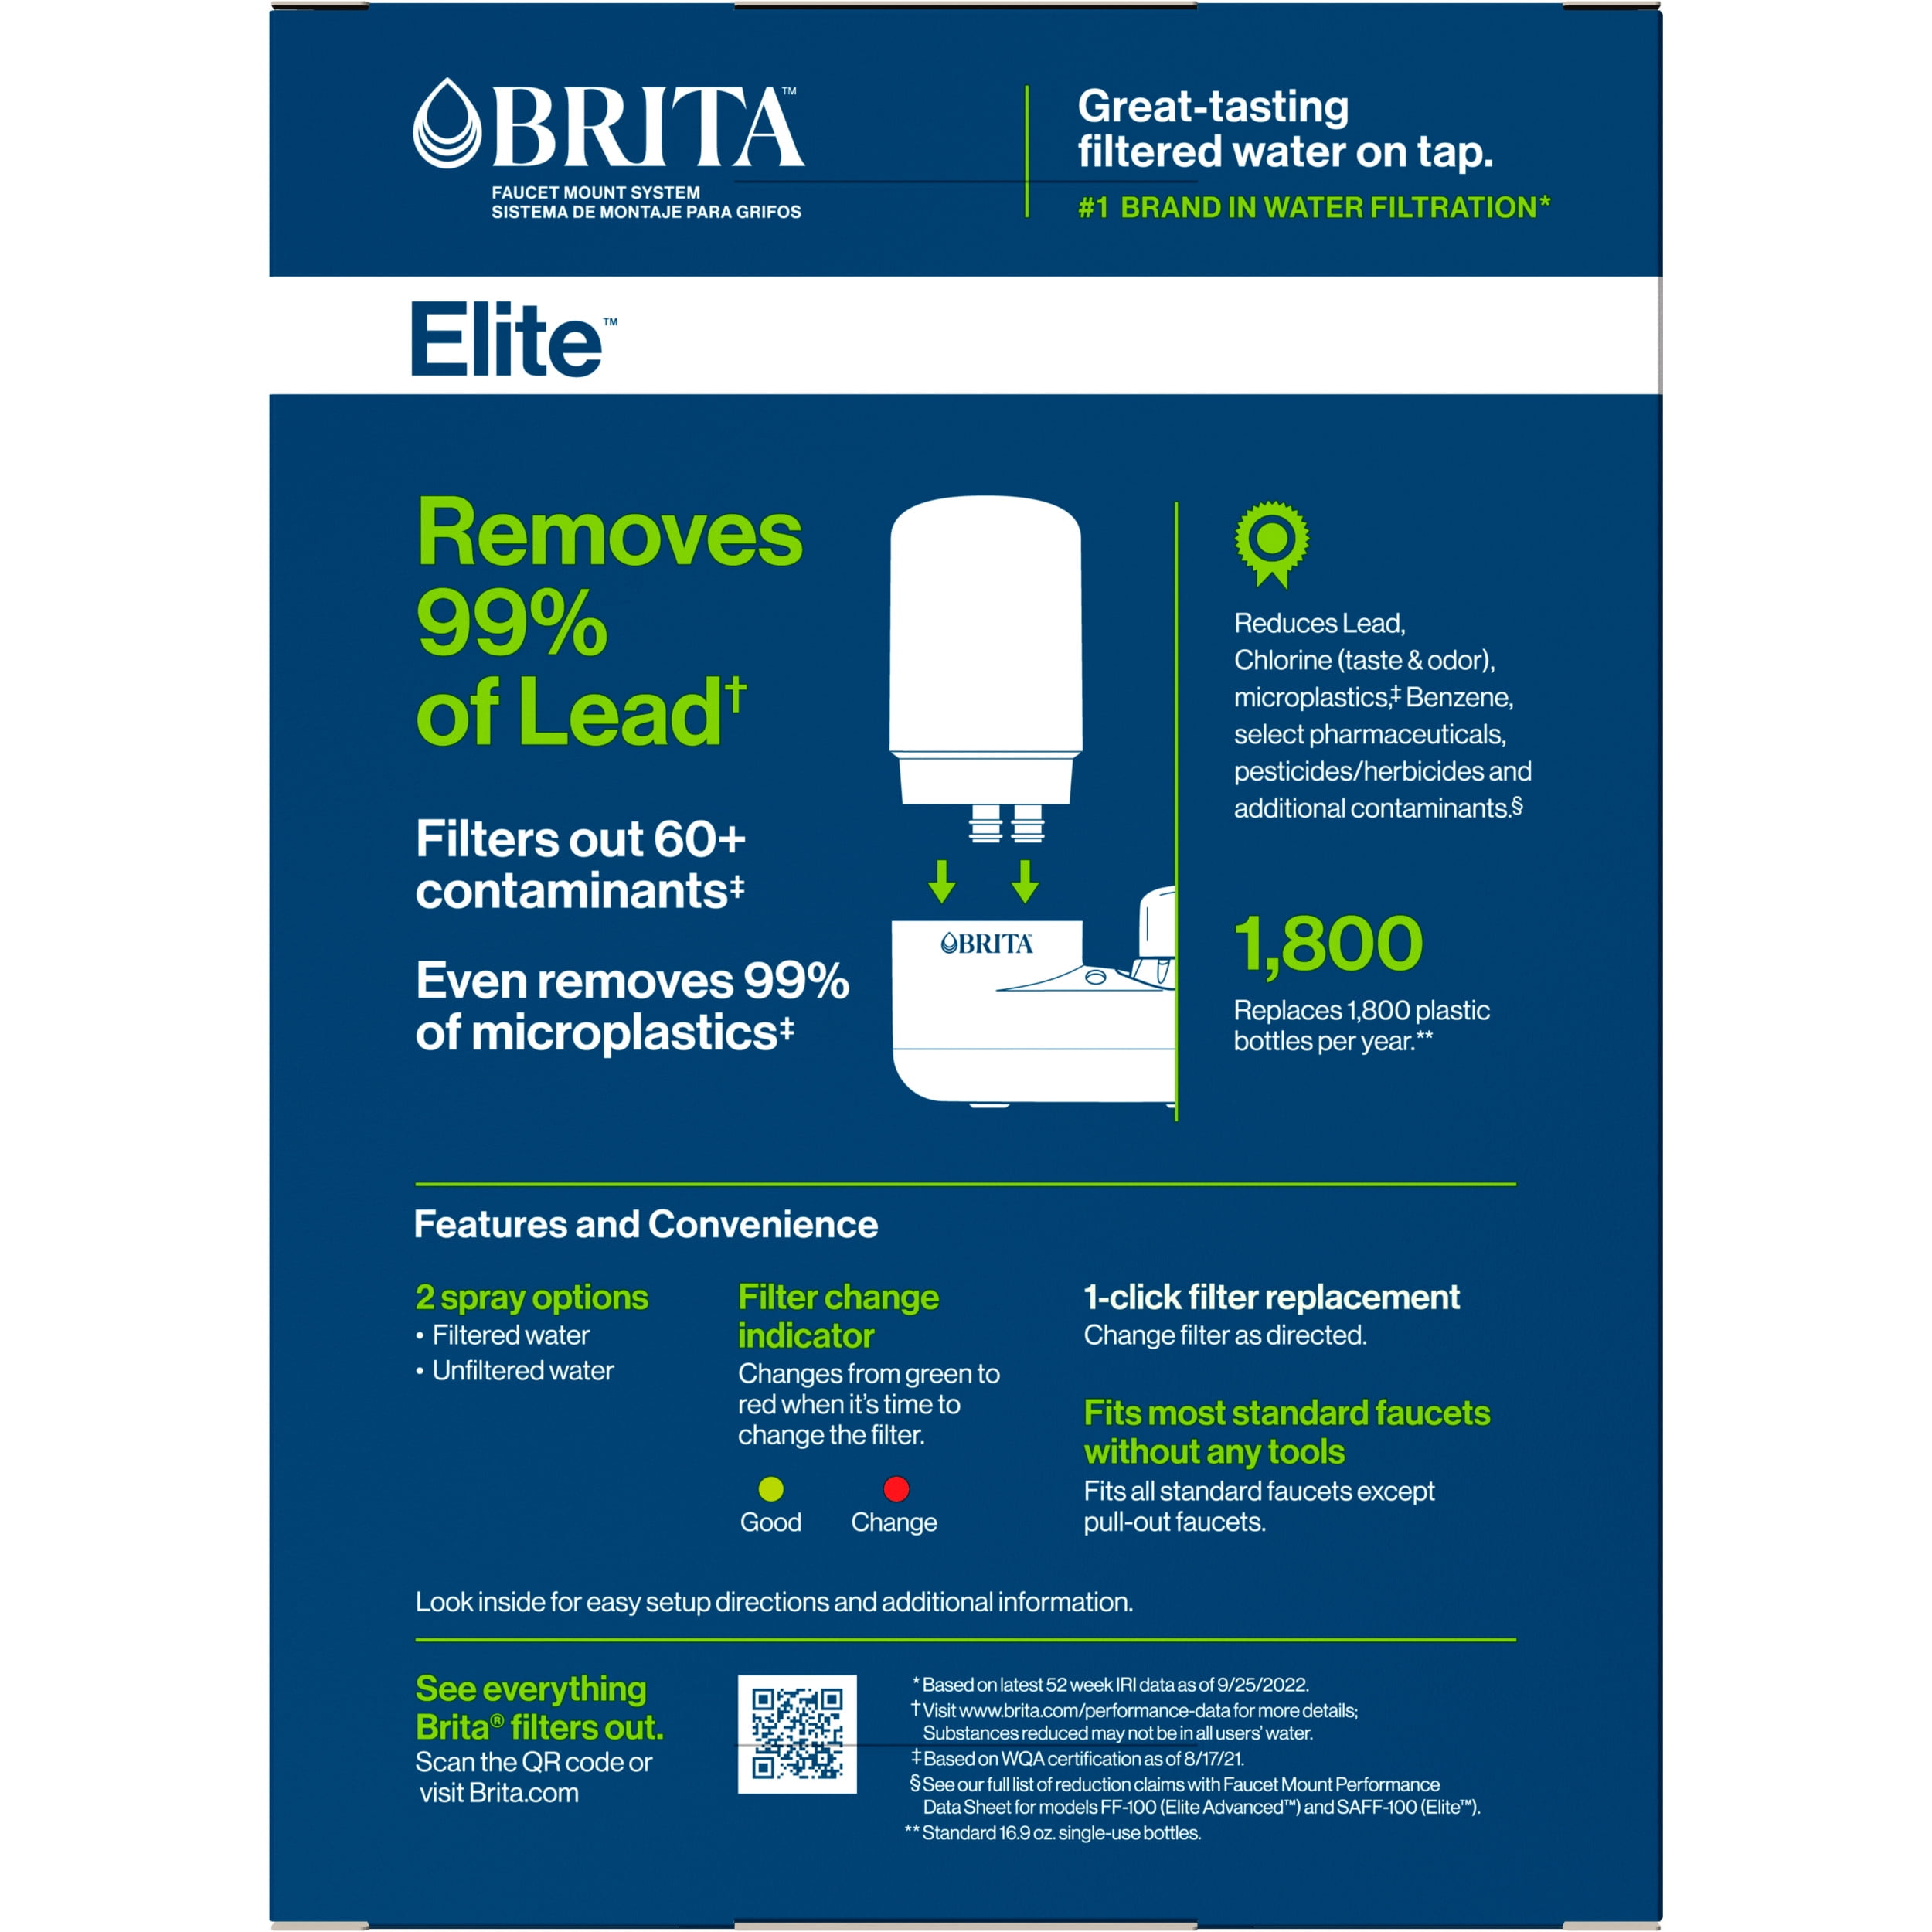 Brita Complete Faucet Mount System, Water Filter Reduces Lead and Chlorine,  White 